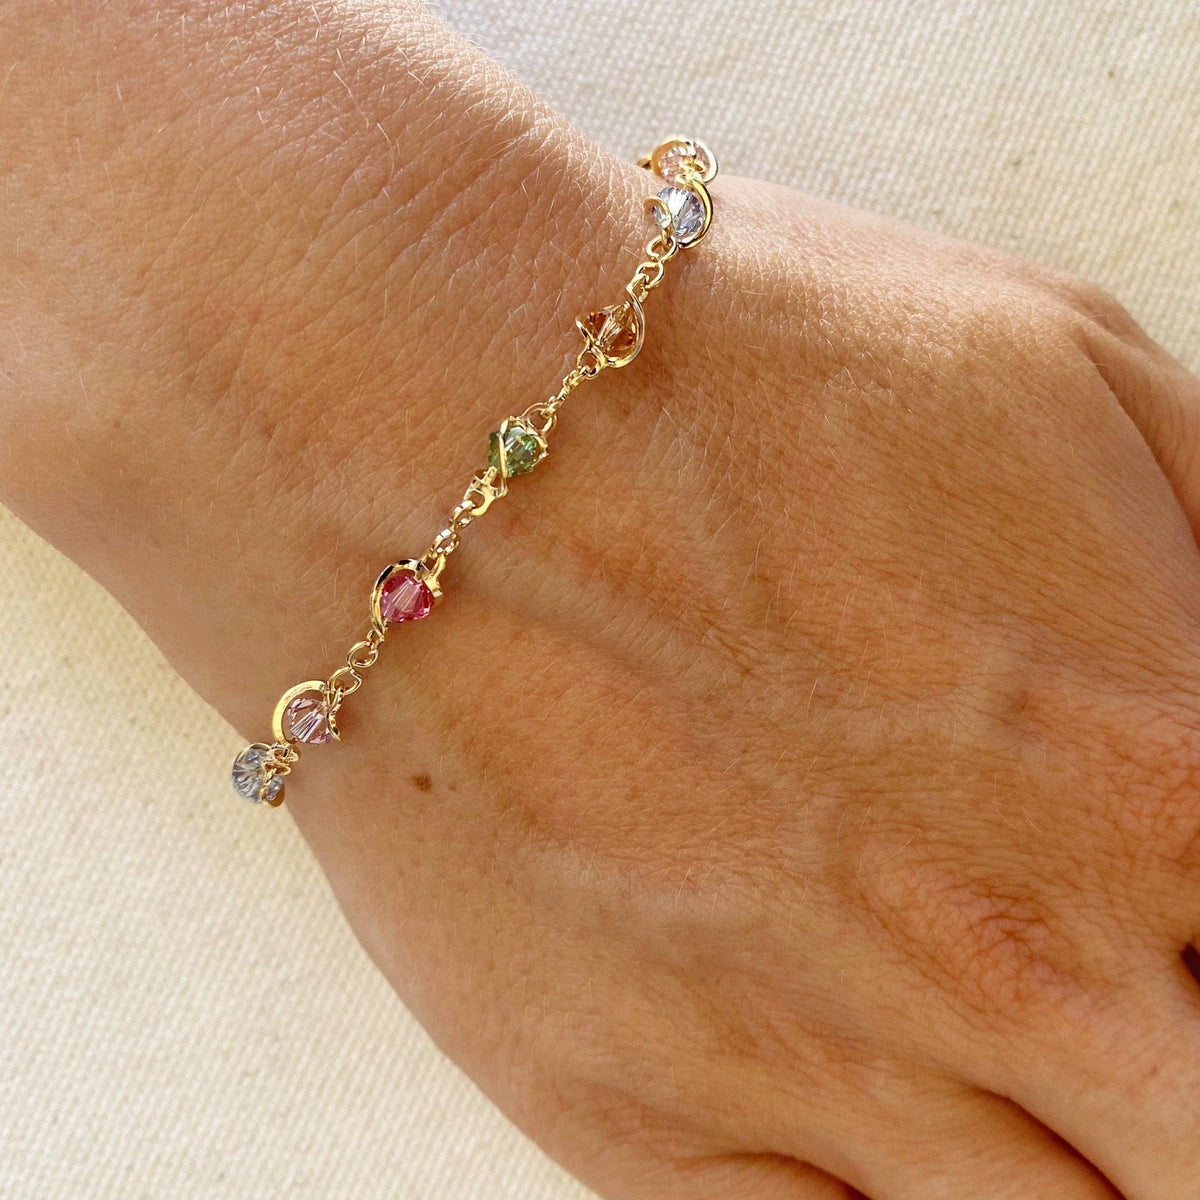 18k Gold Filled Bracelet with Colorful Crystal Beads